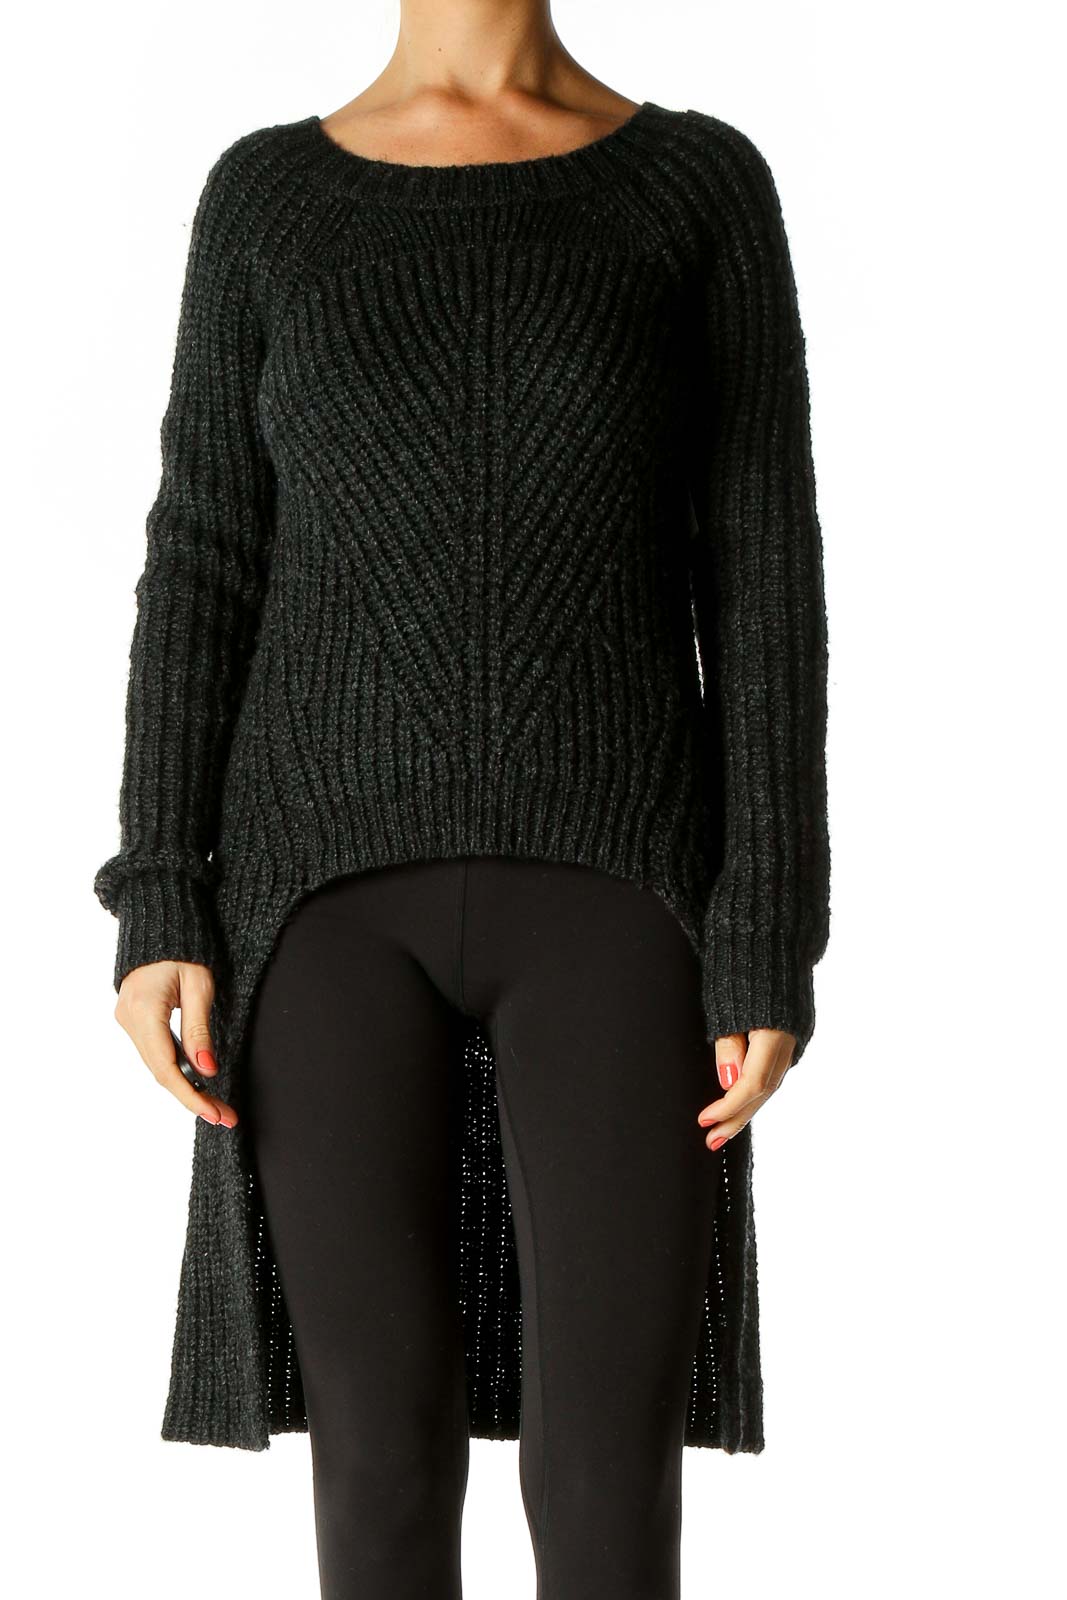 Black Textured All Day Wear Sweater Front